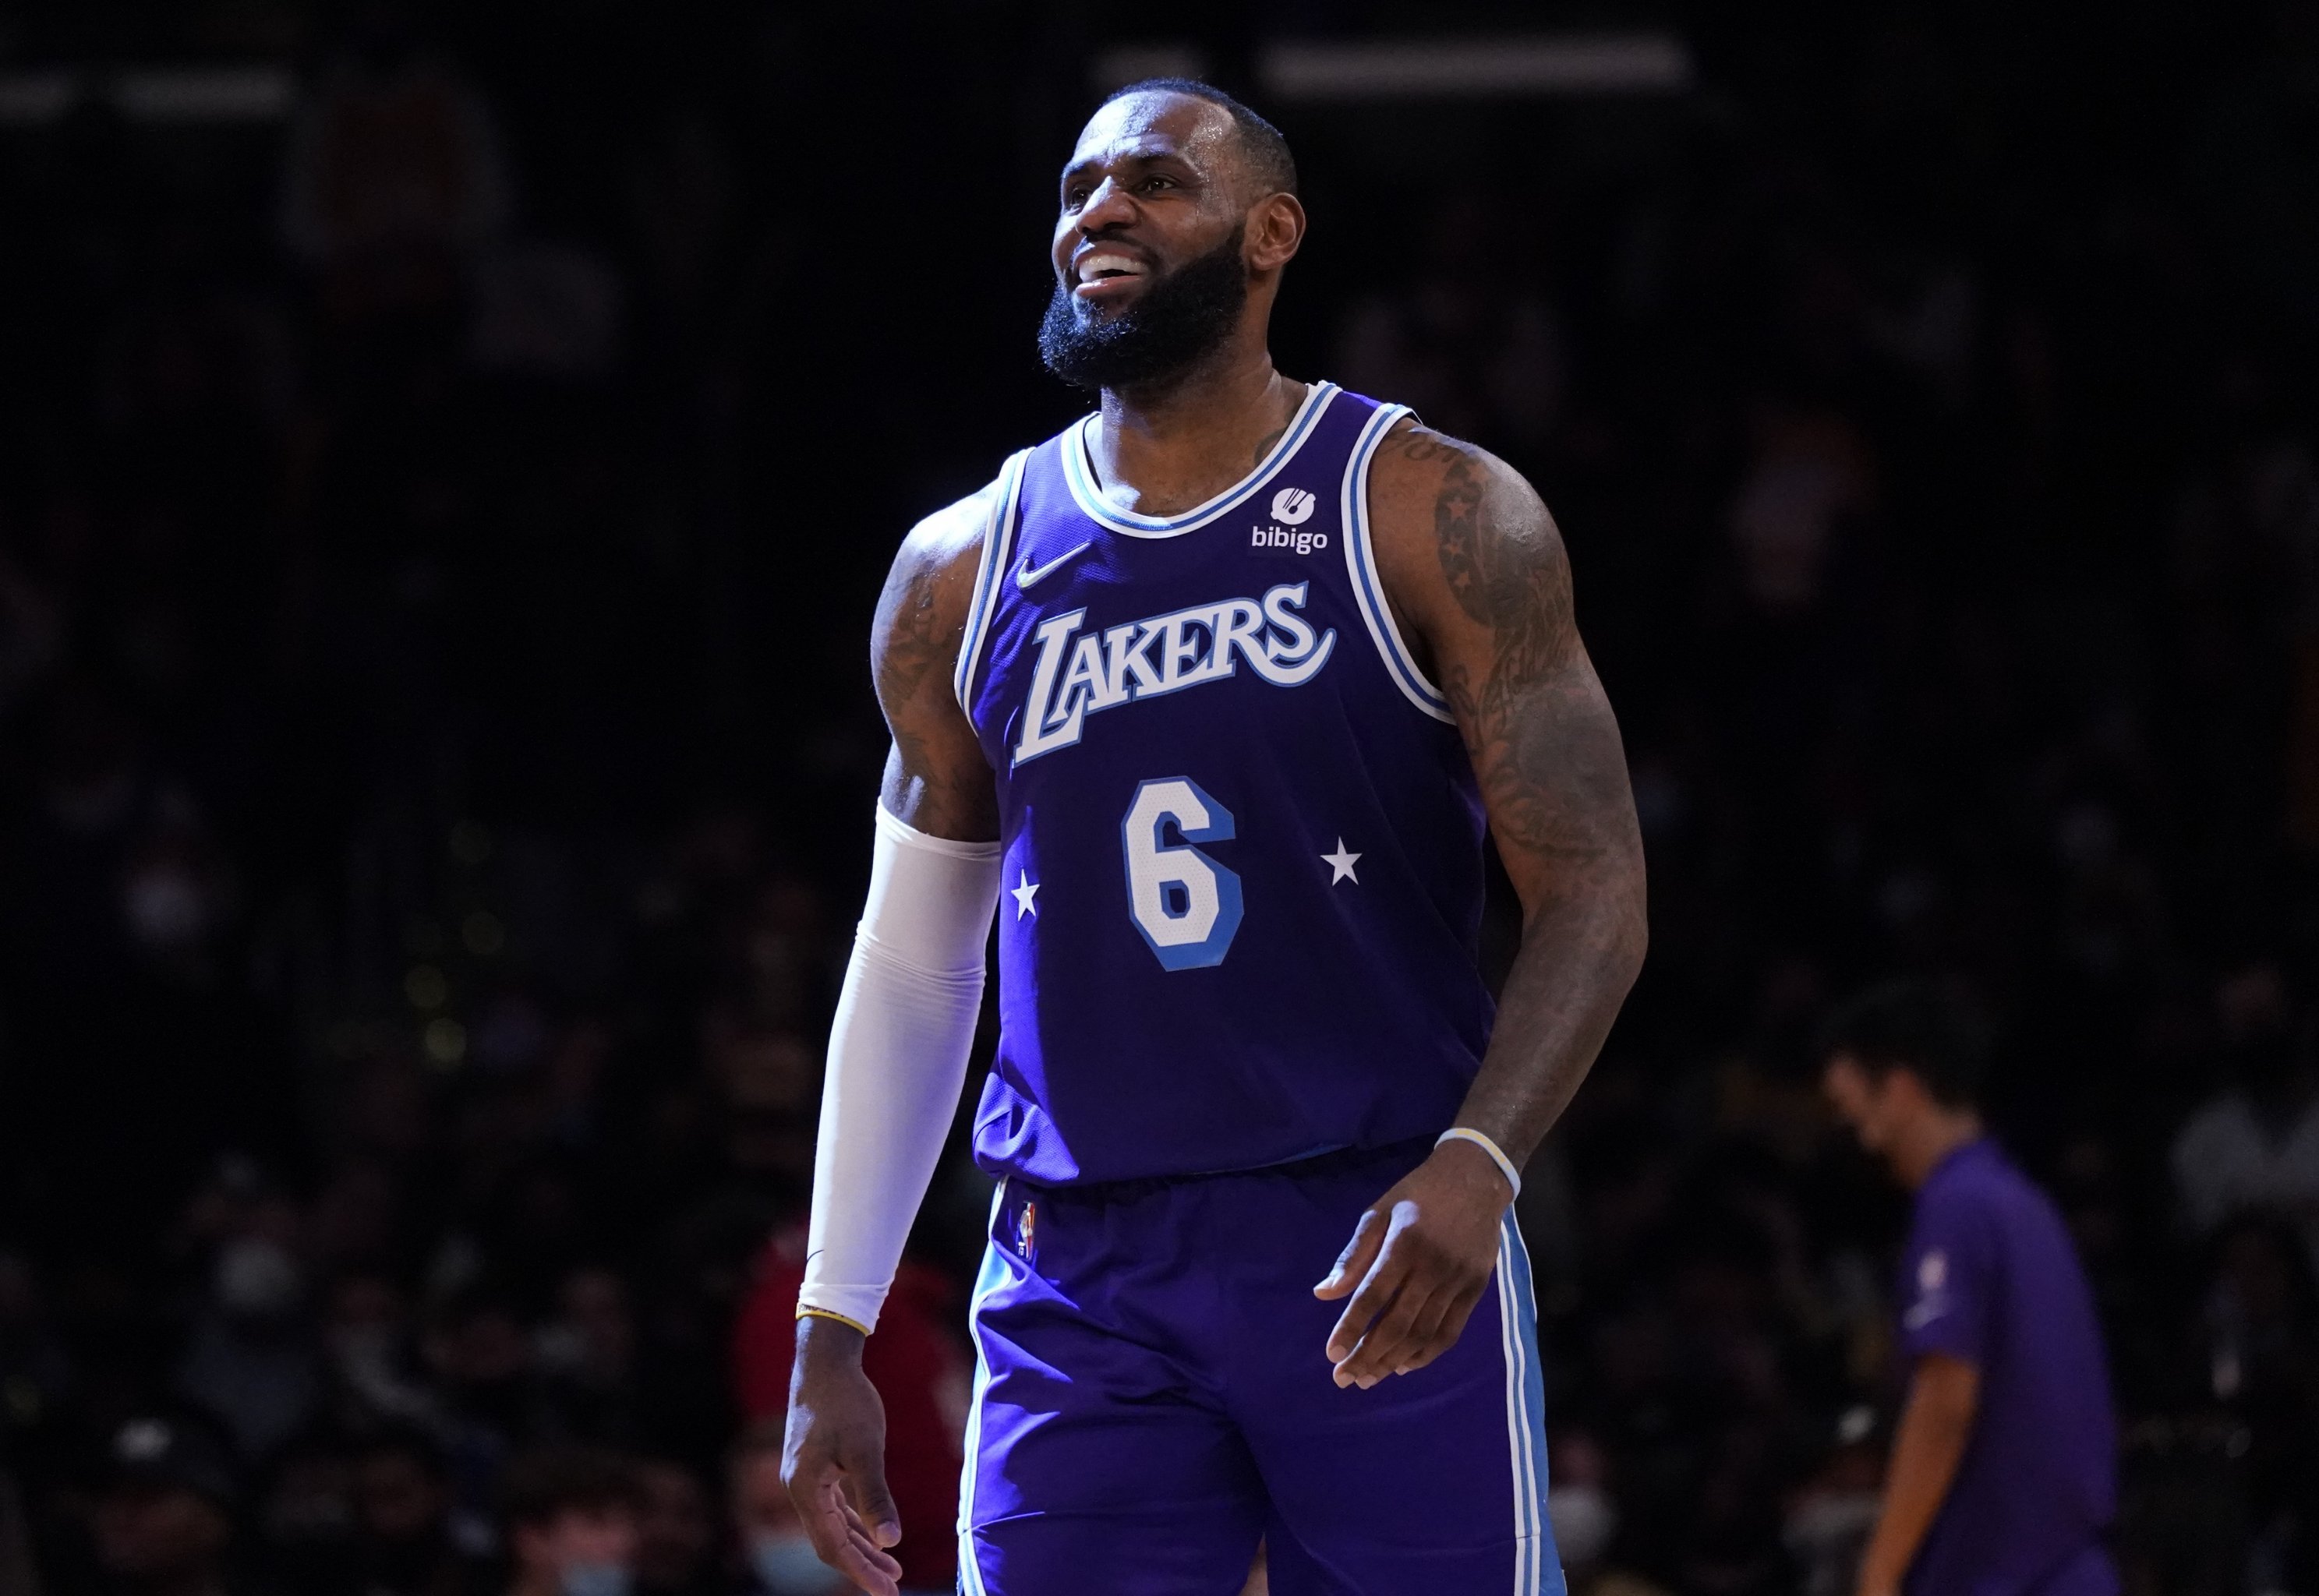 NBA All-Star predictions: LeBron James, Kevin Durant and a first